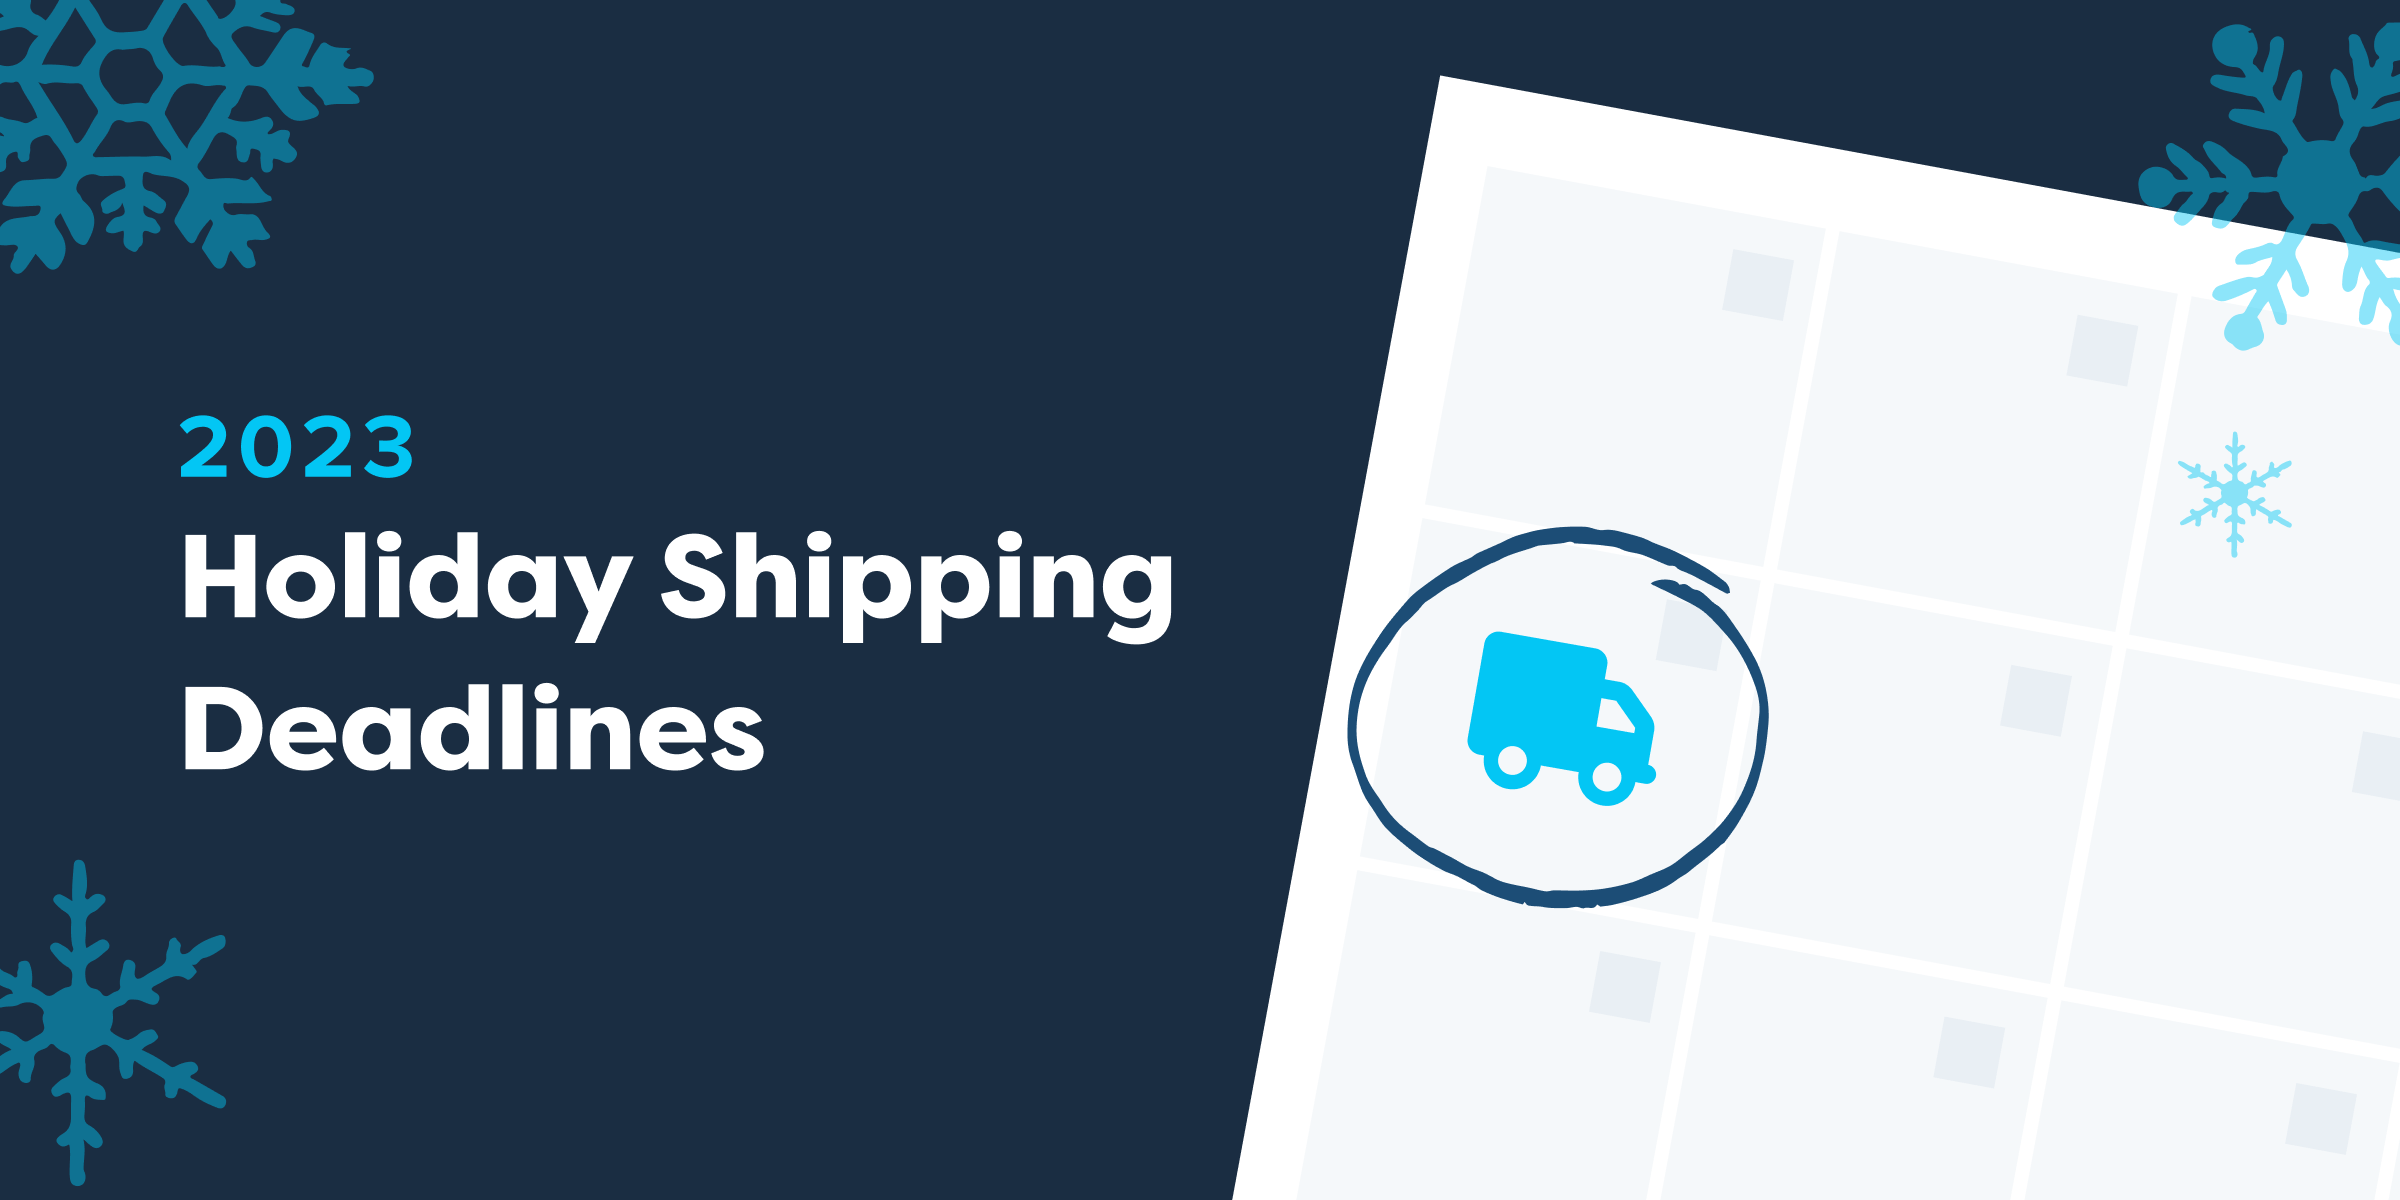 2023 Holiday Shipping Deadlines for USPS, FedEx, and UPS